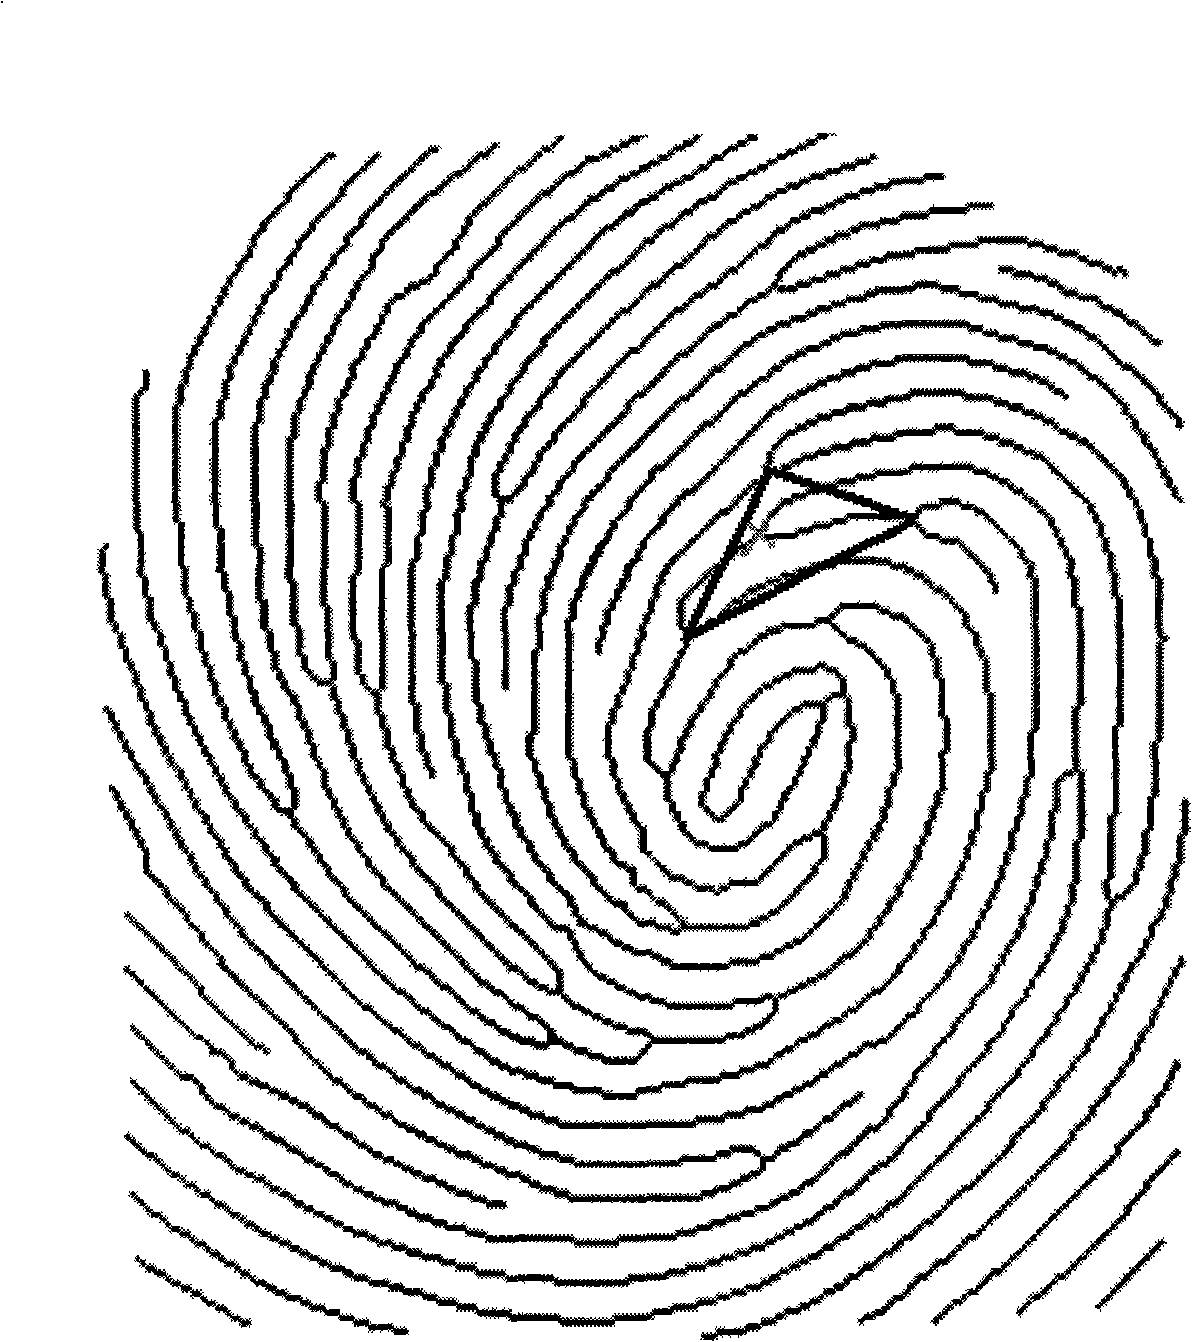 Fingerprint identification method base on four characteristic points topological structure